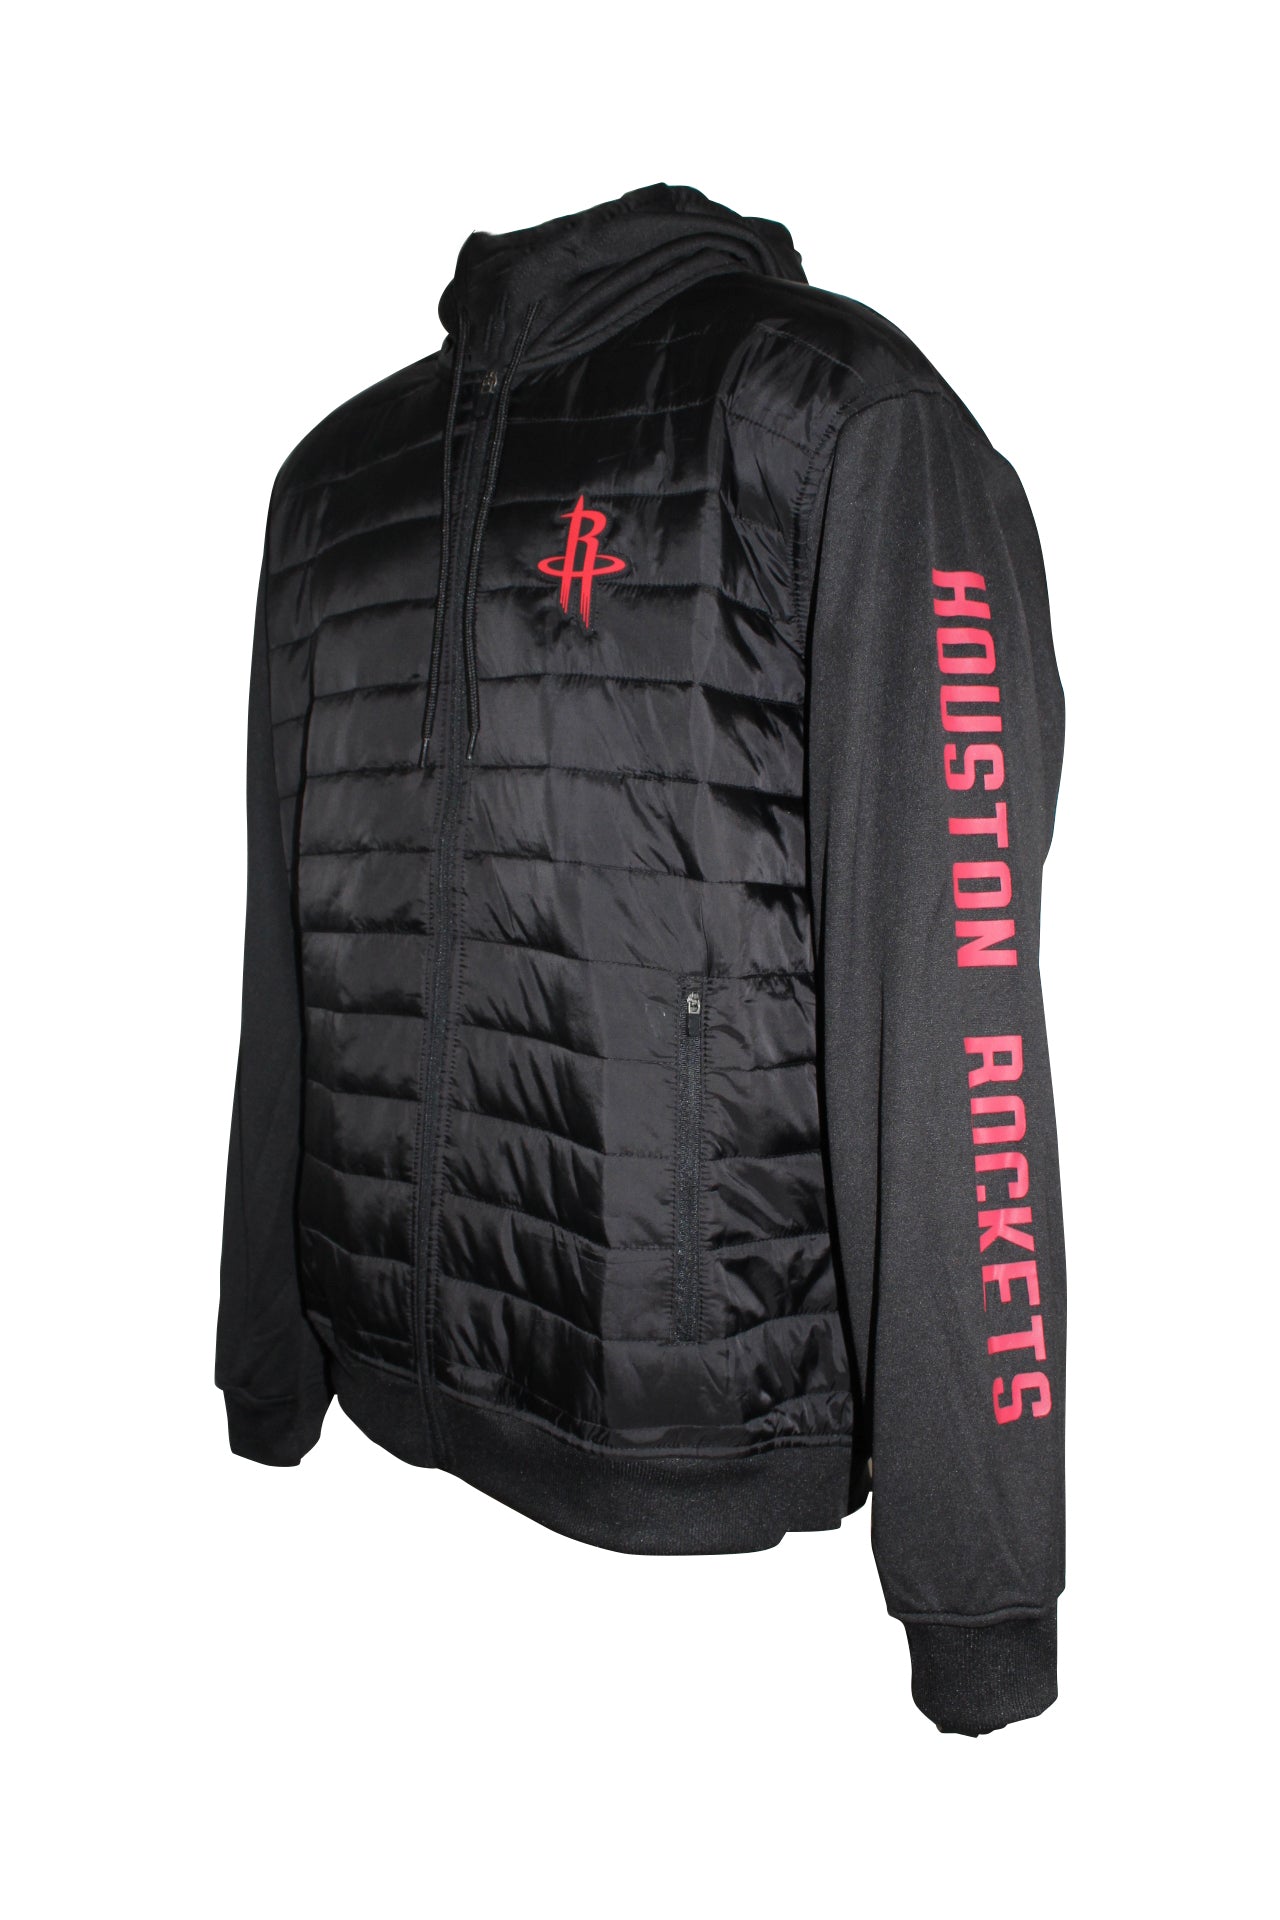 Men's NBA Houston Rockets Quilted Panel Jacket with Hoodie Black